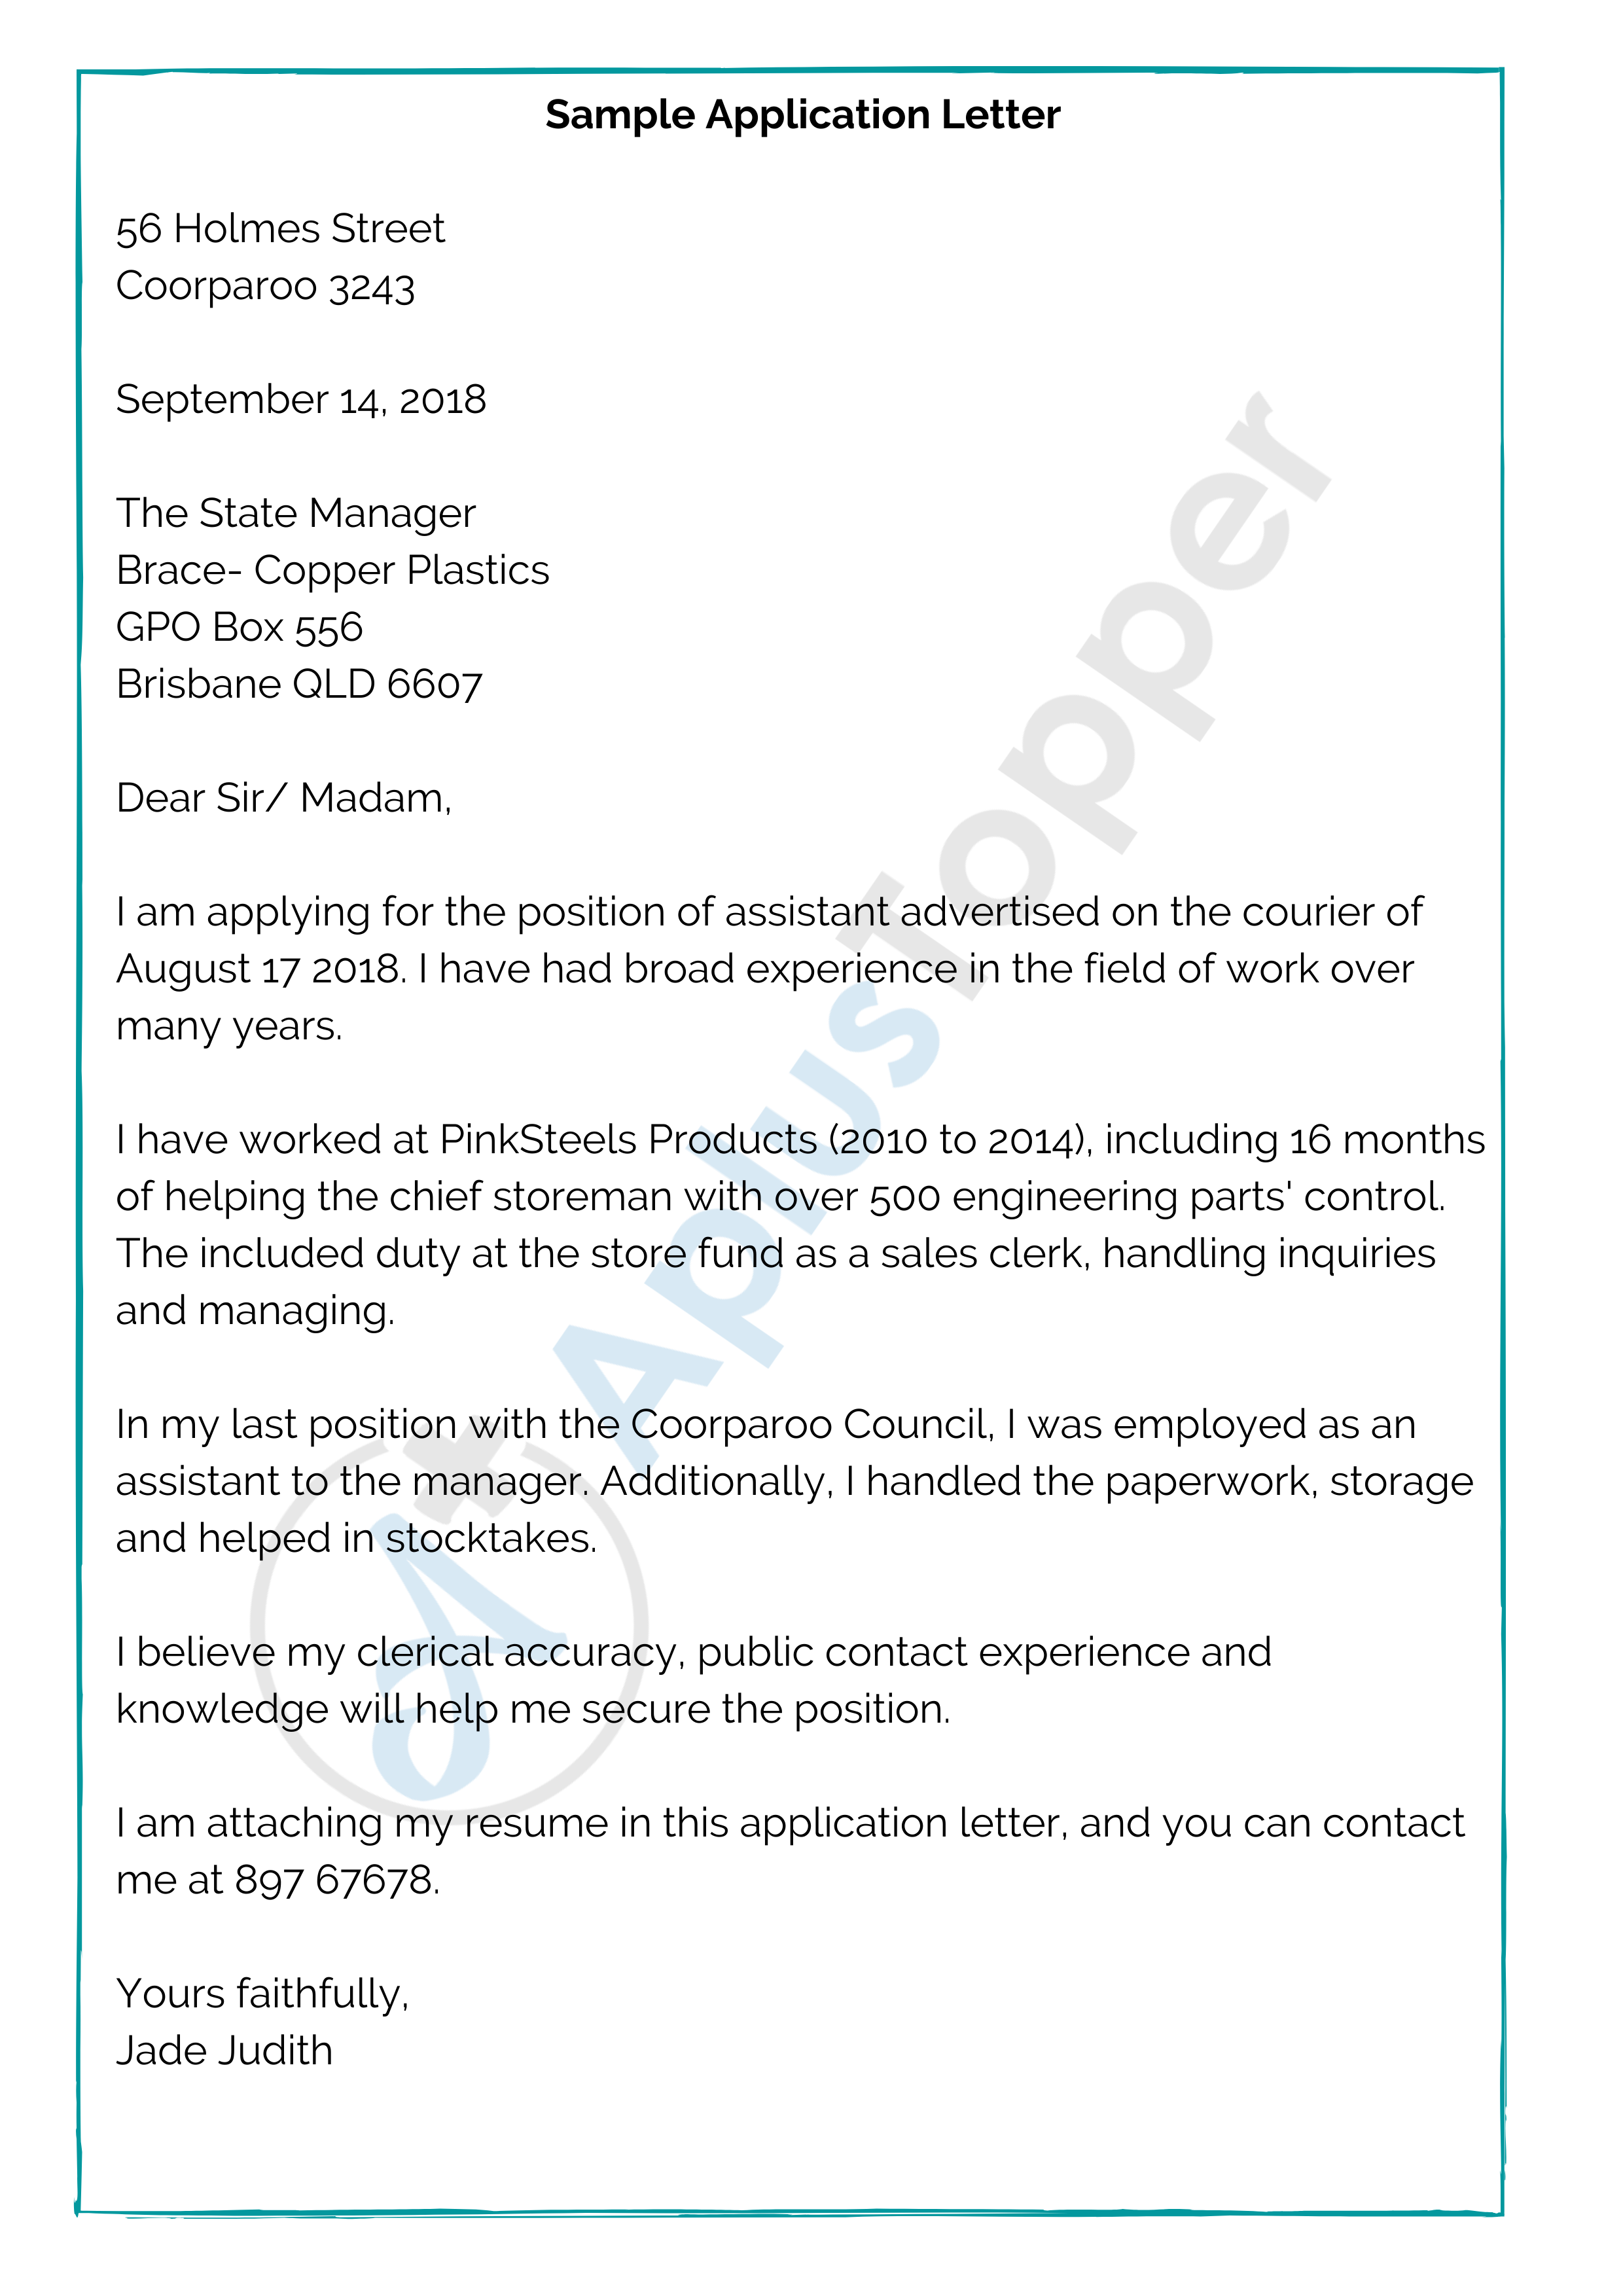 the purpose of a application letter